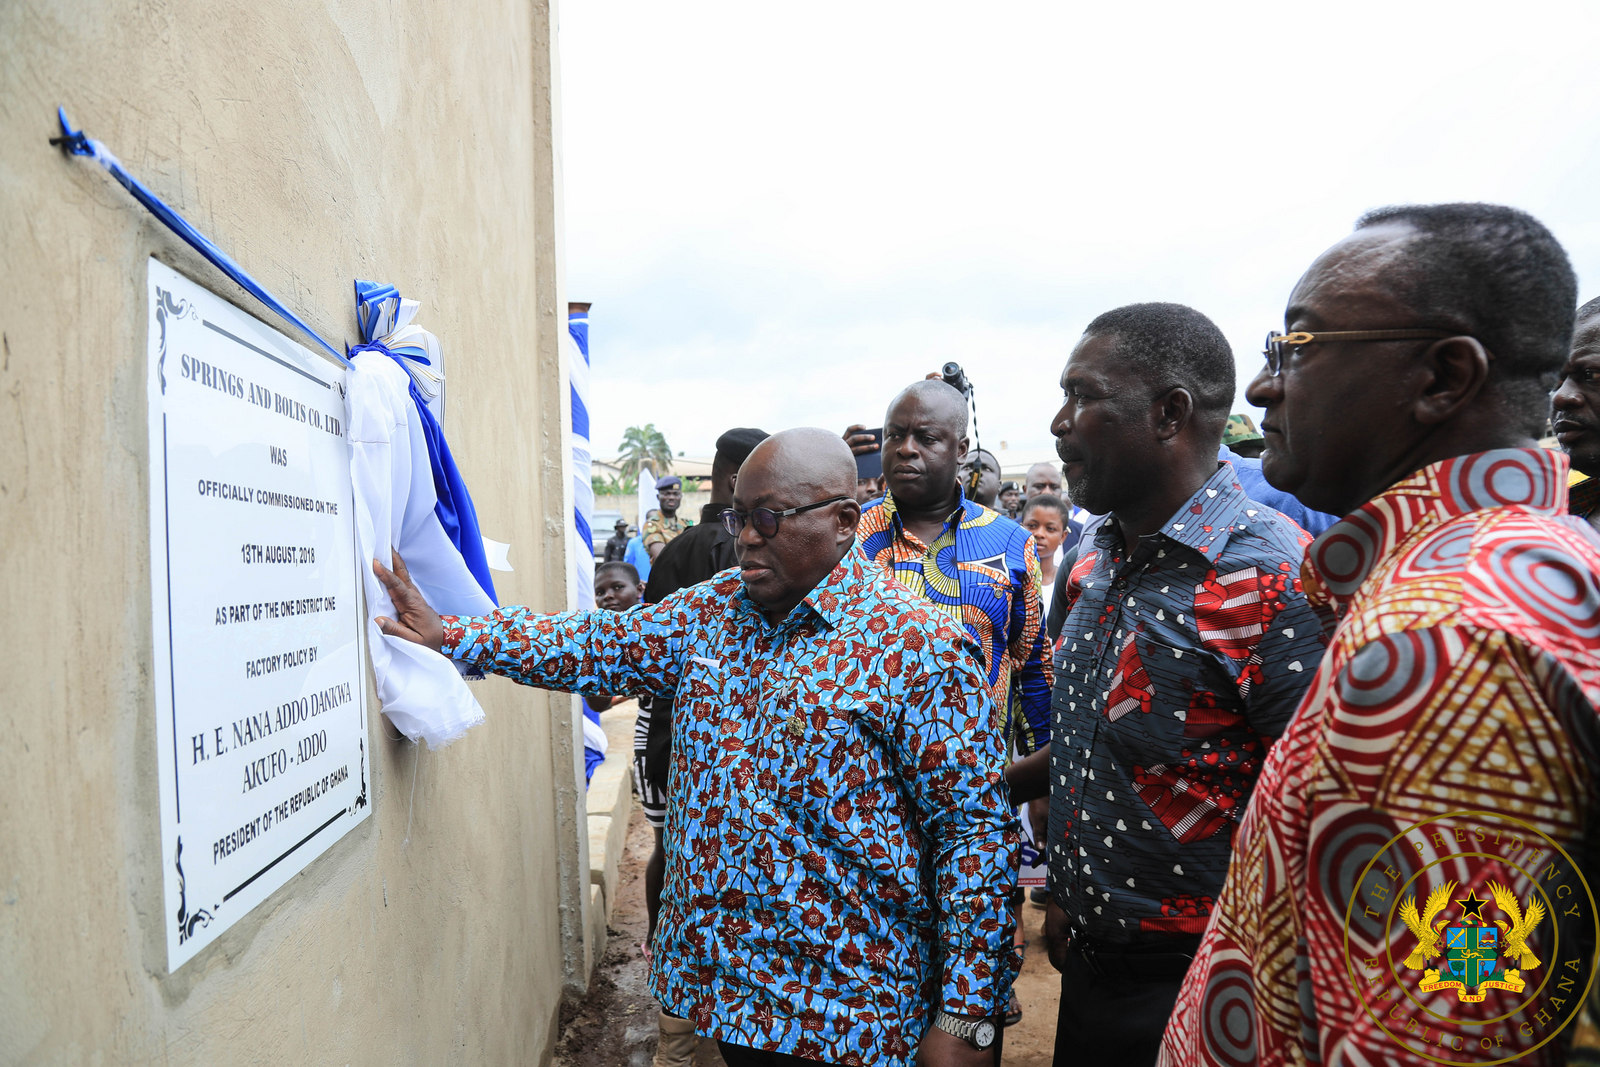 President Akufo-Addo unveiling the plaque at the commissioning